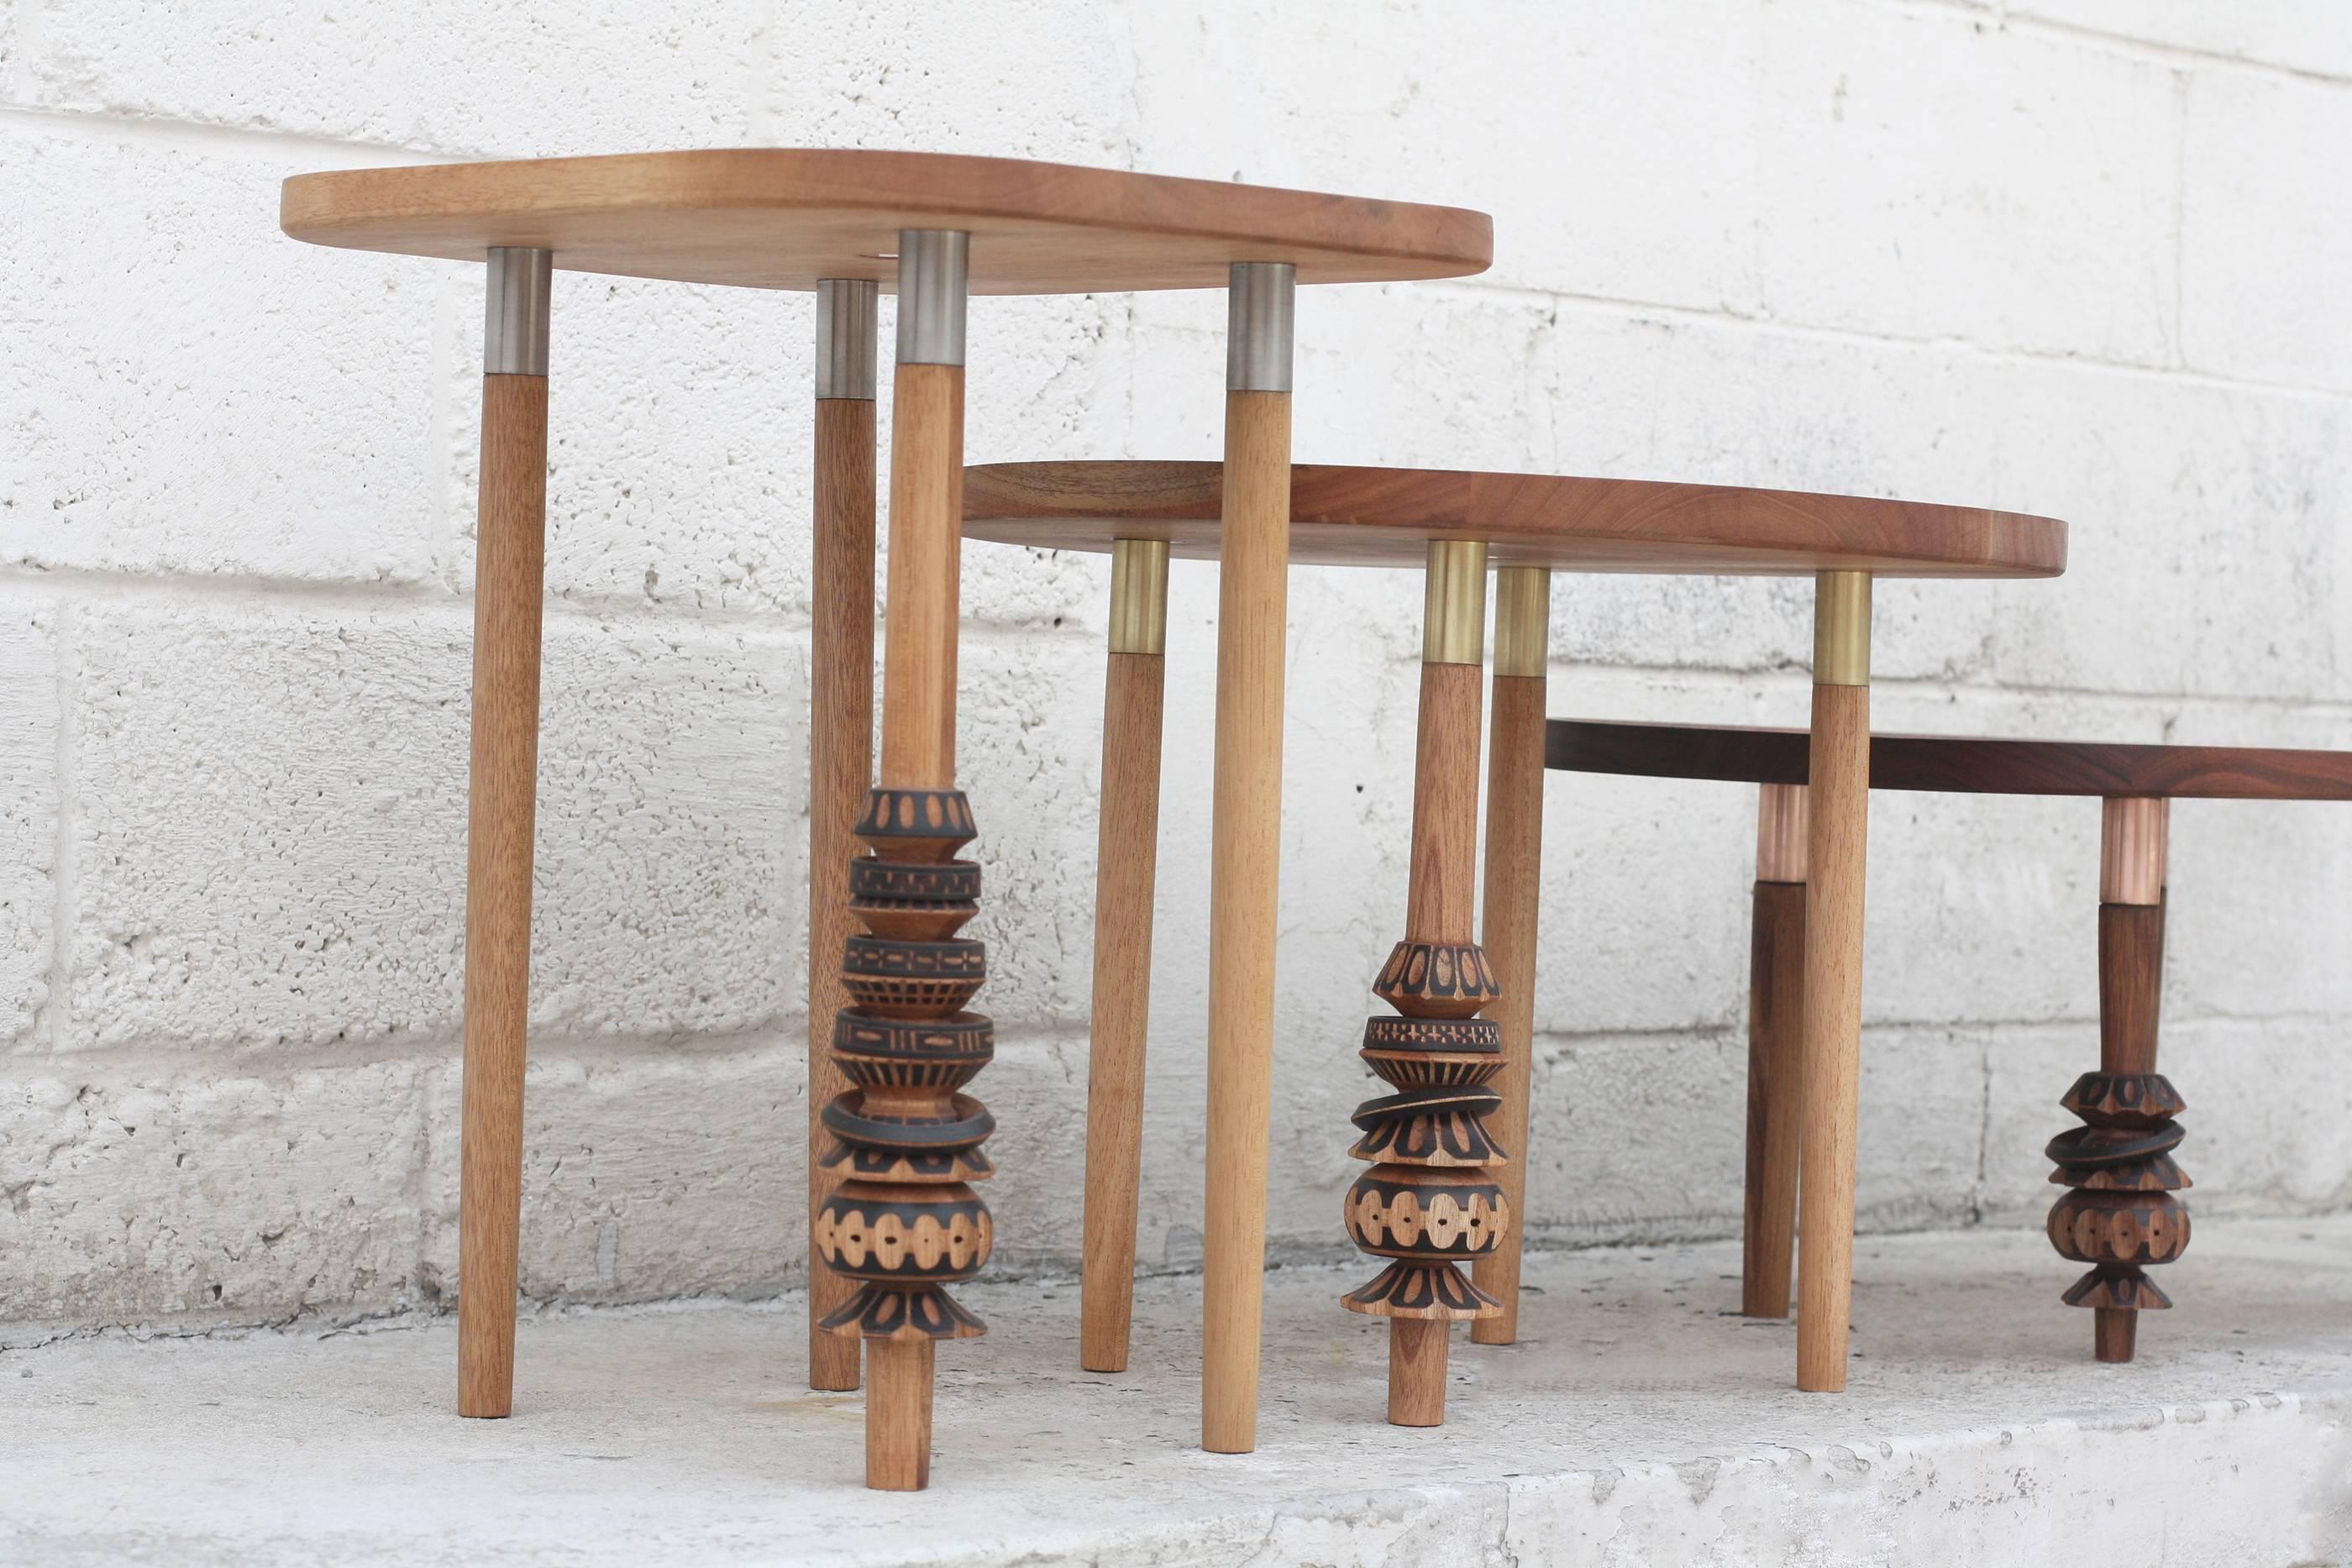 This set of coffee tables are part of a collection worked hand-by-hand with Mexican artisan Antelmo.

Antelmo was born and raised in a small town in central Mexico named Santa María Rayón, State of Mexico. Antelmo has dedicated his life to become